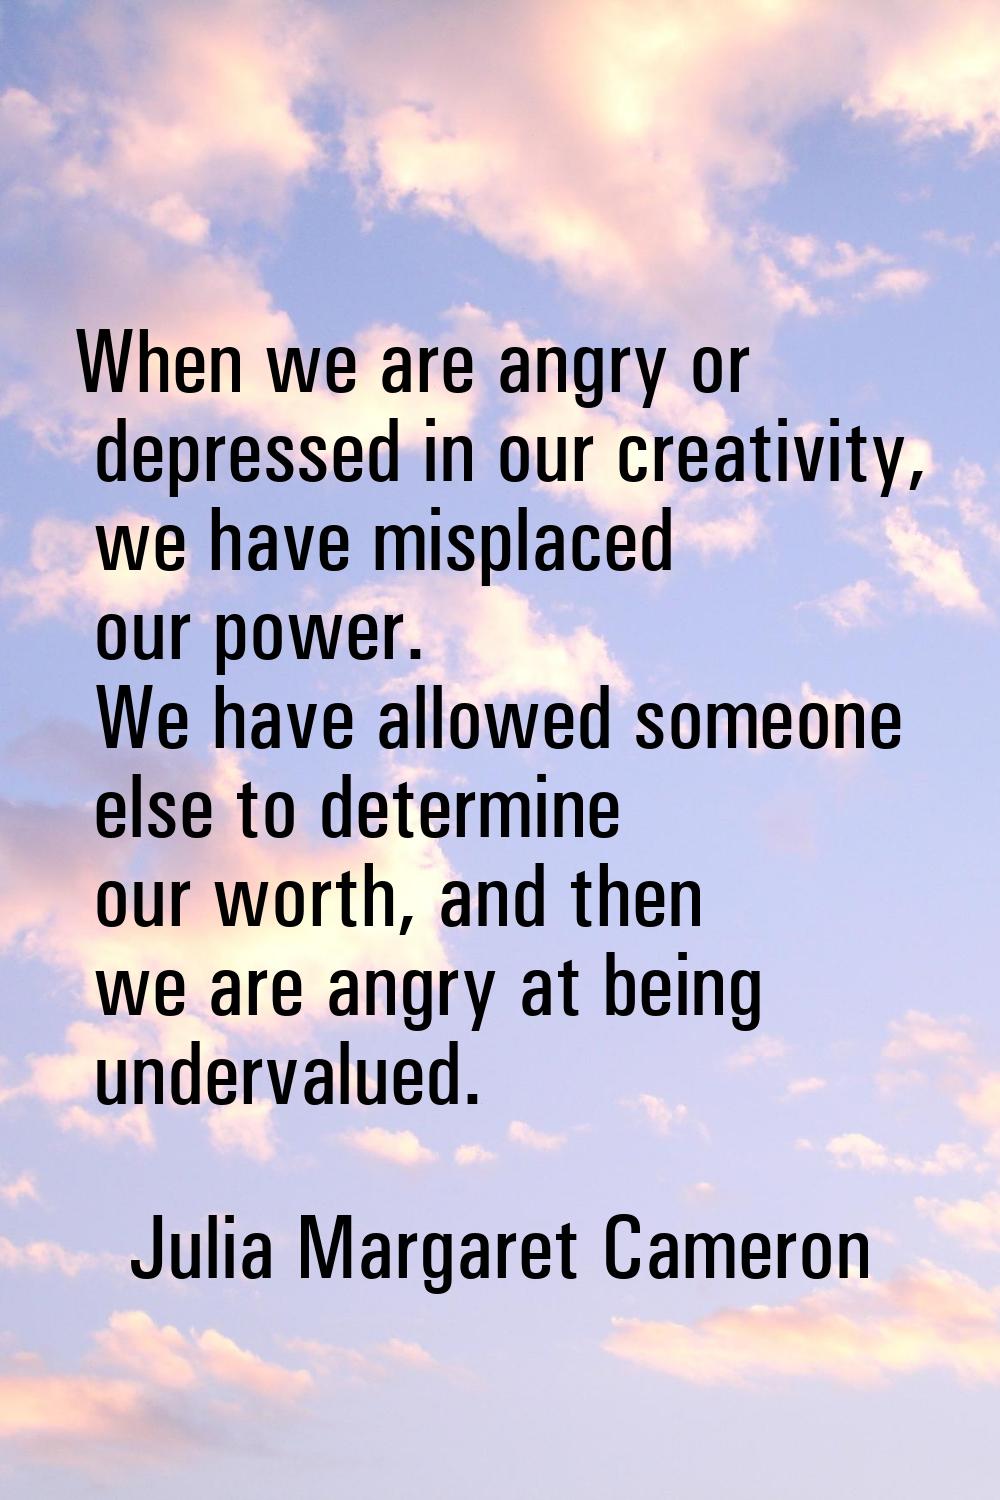 When we are angry or depressed in our creativity, we have misplaced our power. We have allowed some